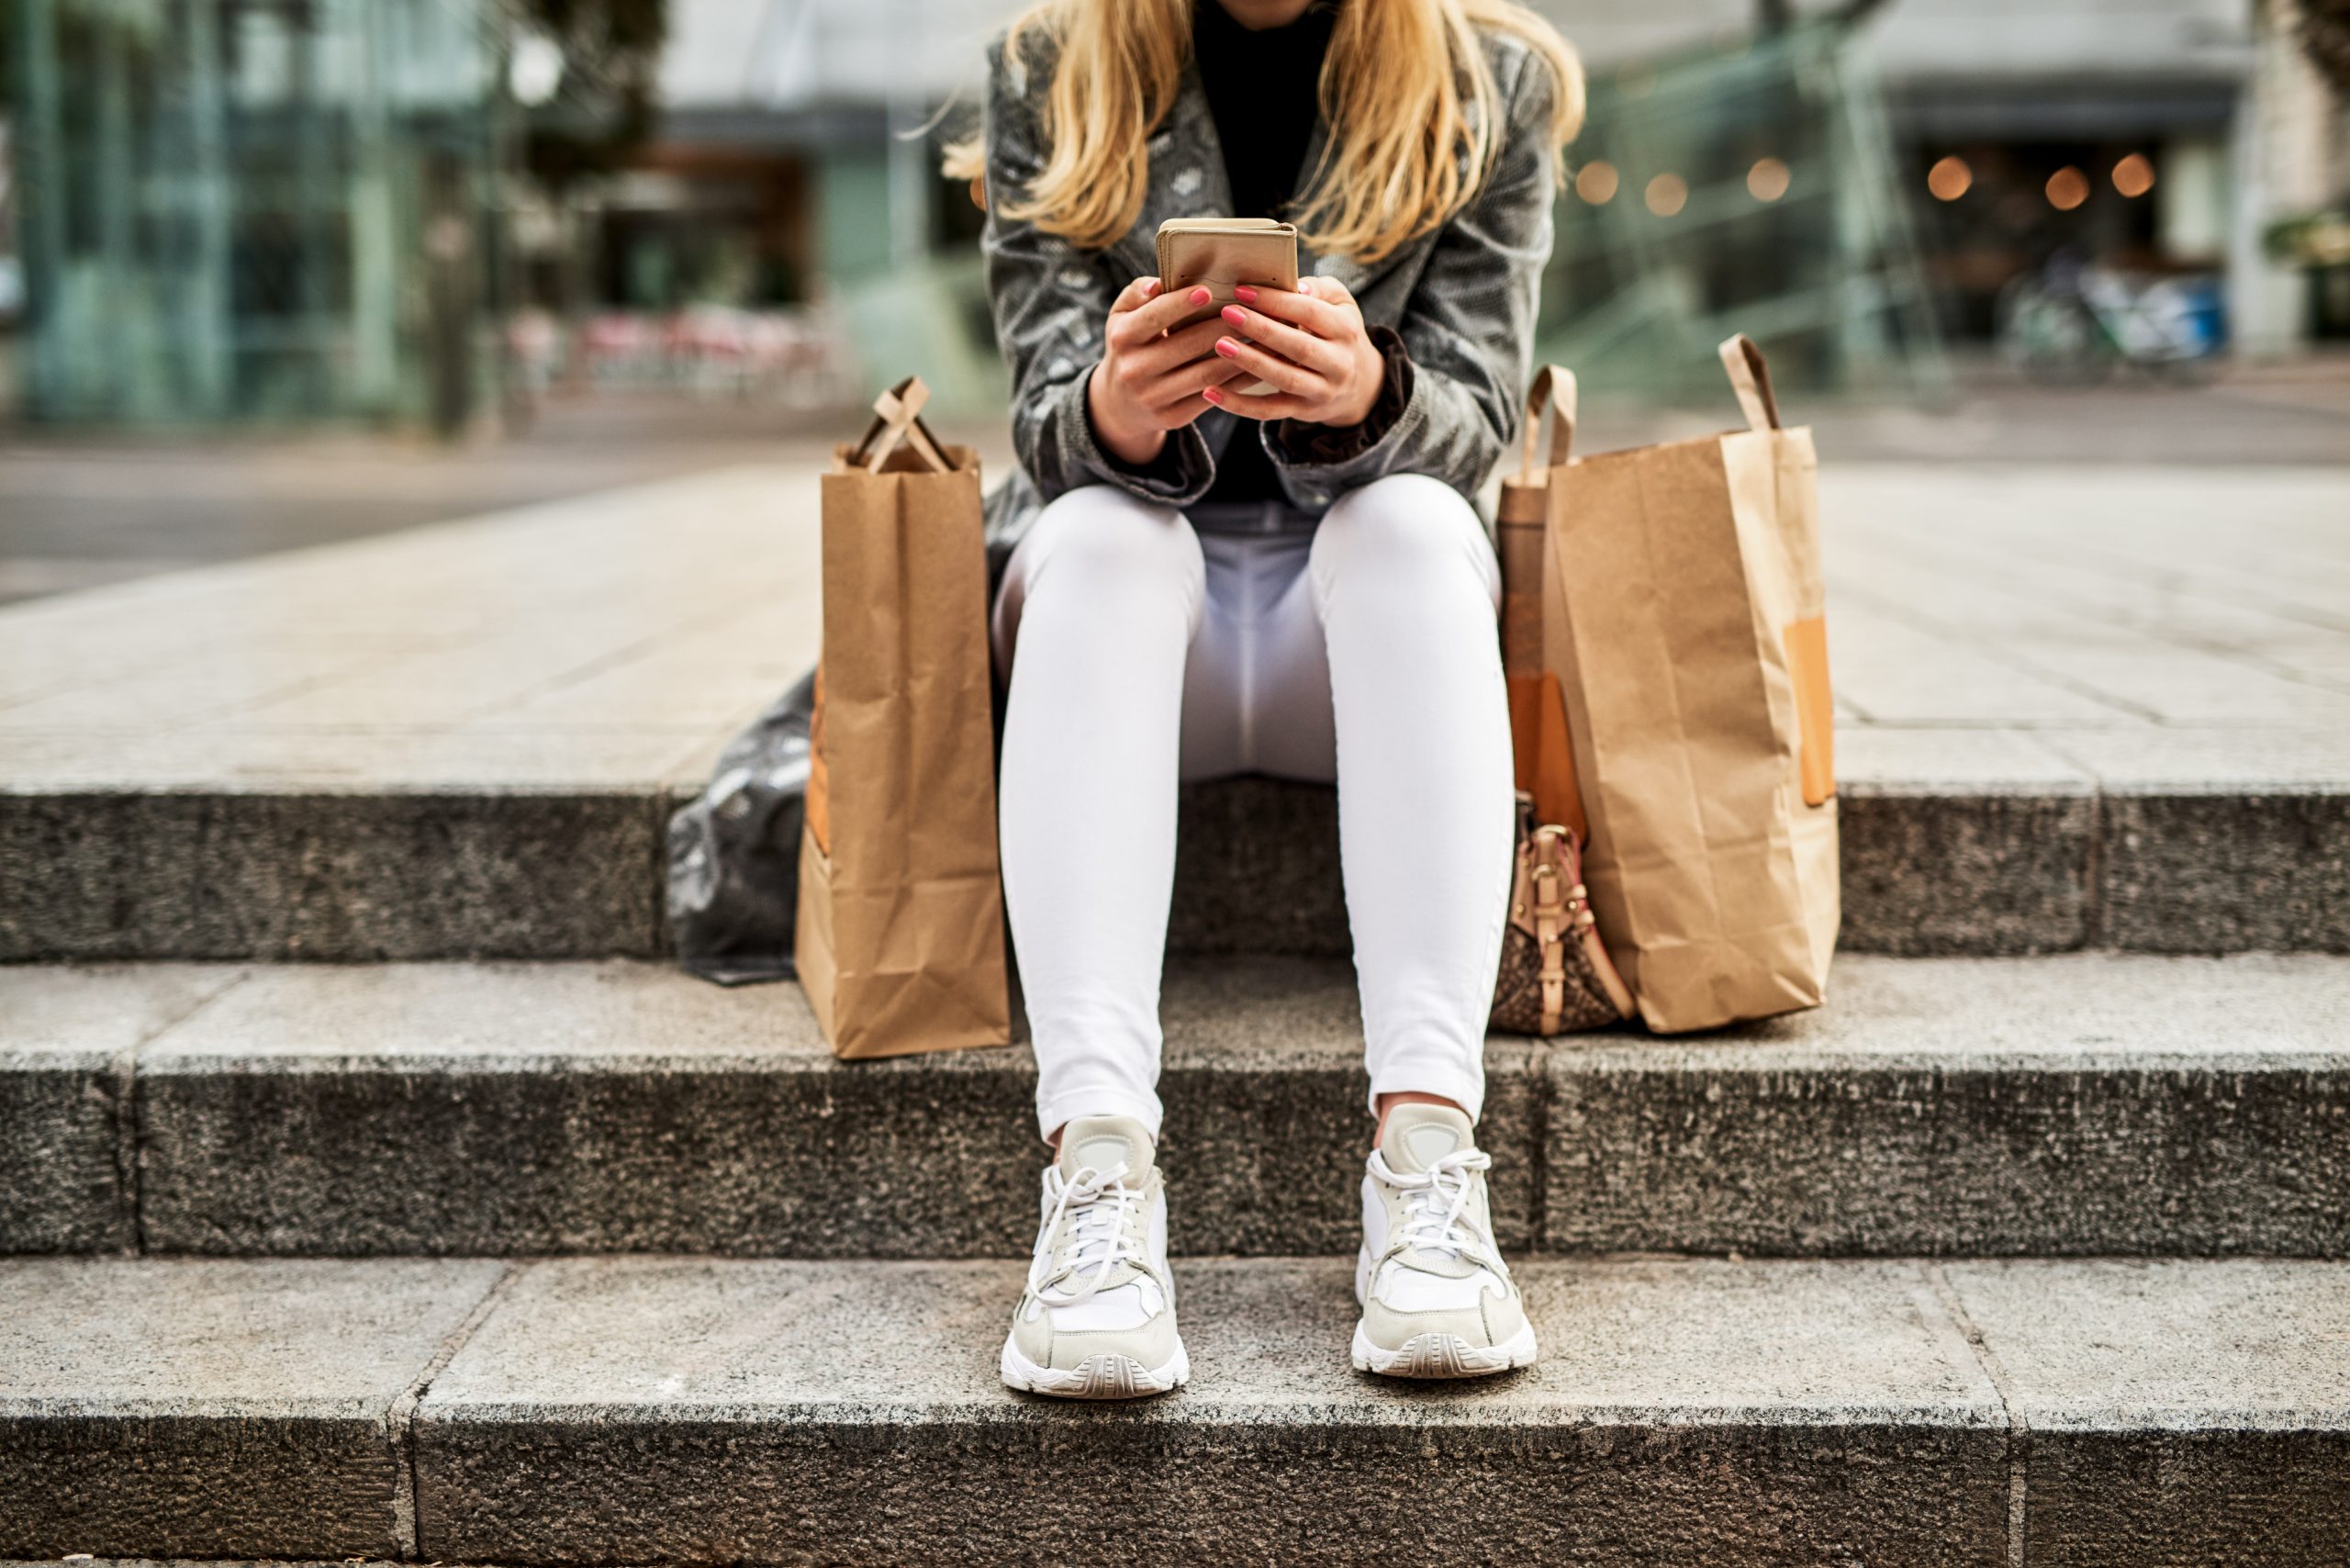 Shopper texting with a store, exemplifying the new omnichannel commerce experience